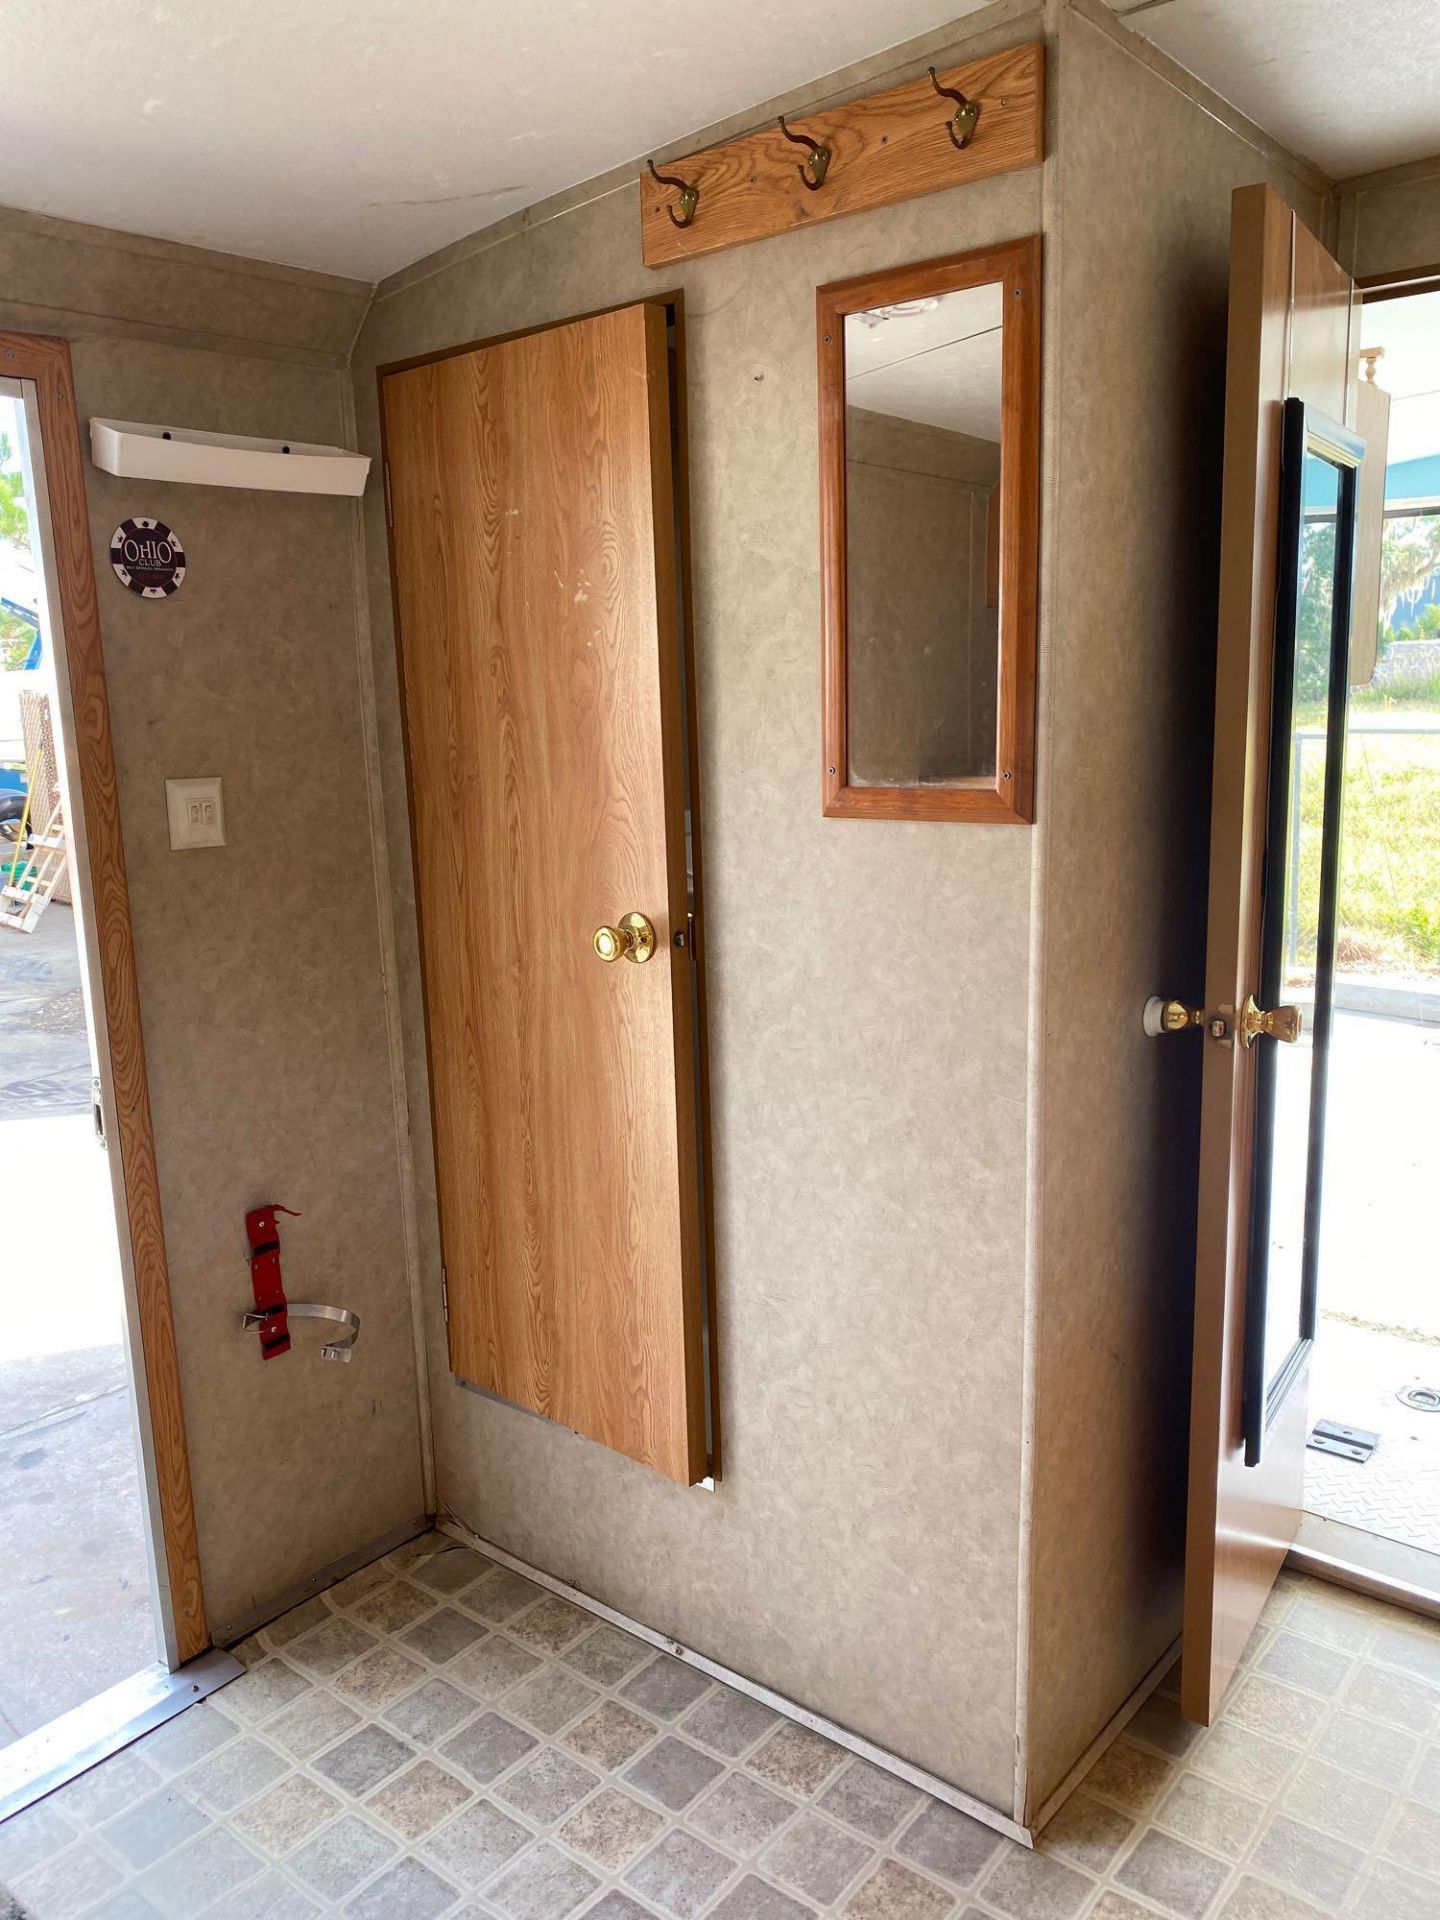 CAMP MASTER DUAL AXLE TRAILER, FOLD OUT REAR RAMP, SIDE DOOR ENTRANCE, BATHROOM WITH SHOWER, MICROWA - Image 11 of 16